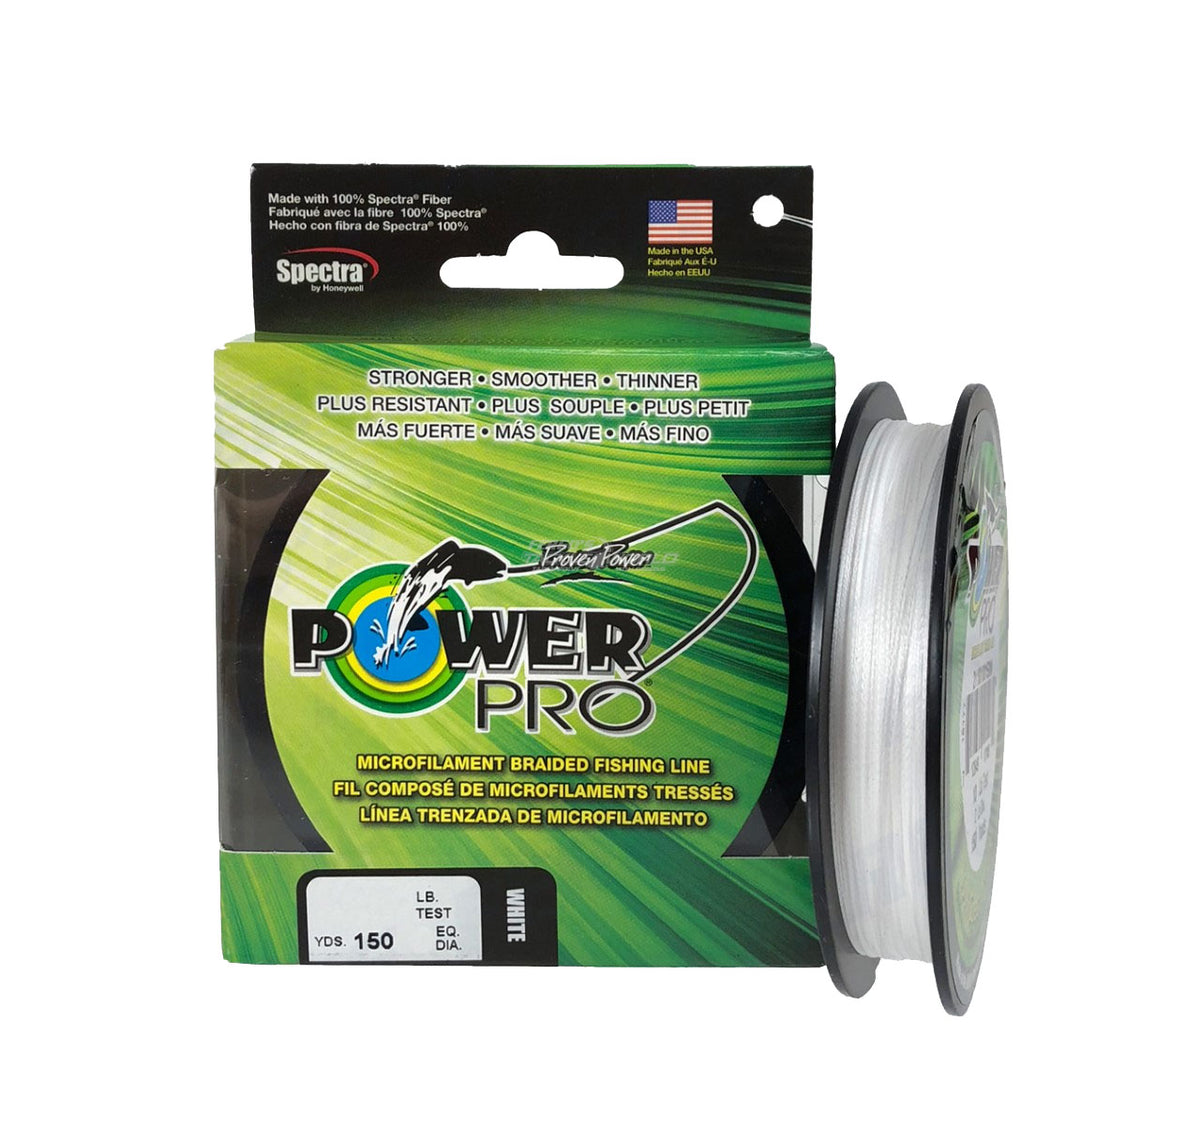 POWER PRO Spectra Braided Fishing Line, 65Lb, 300Yds, Green